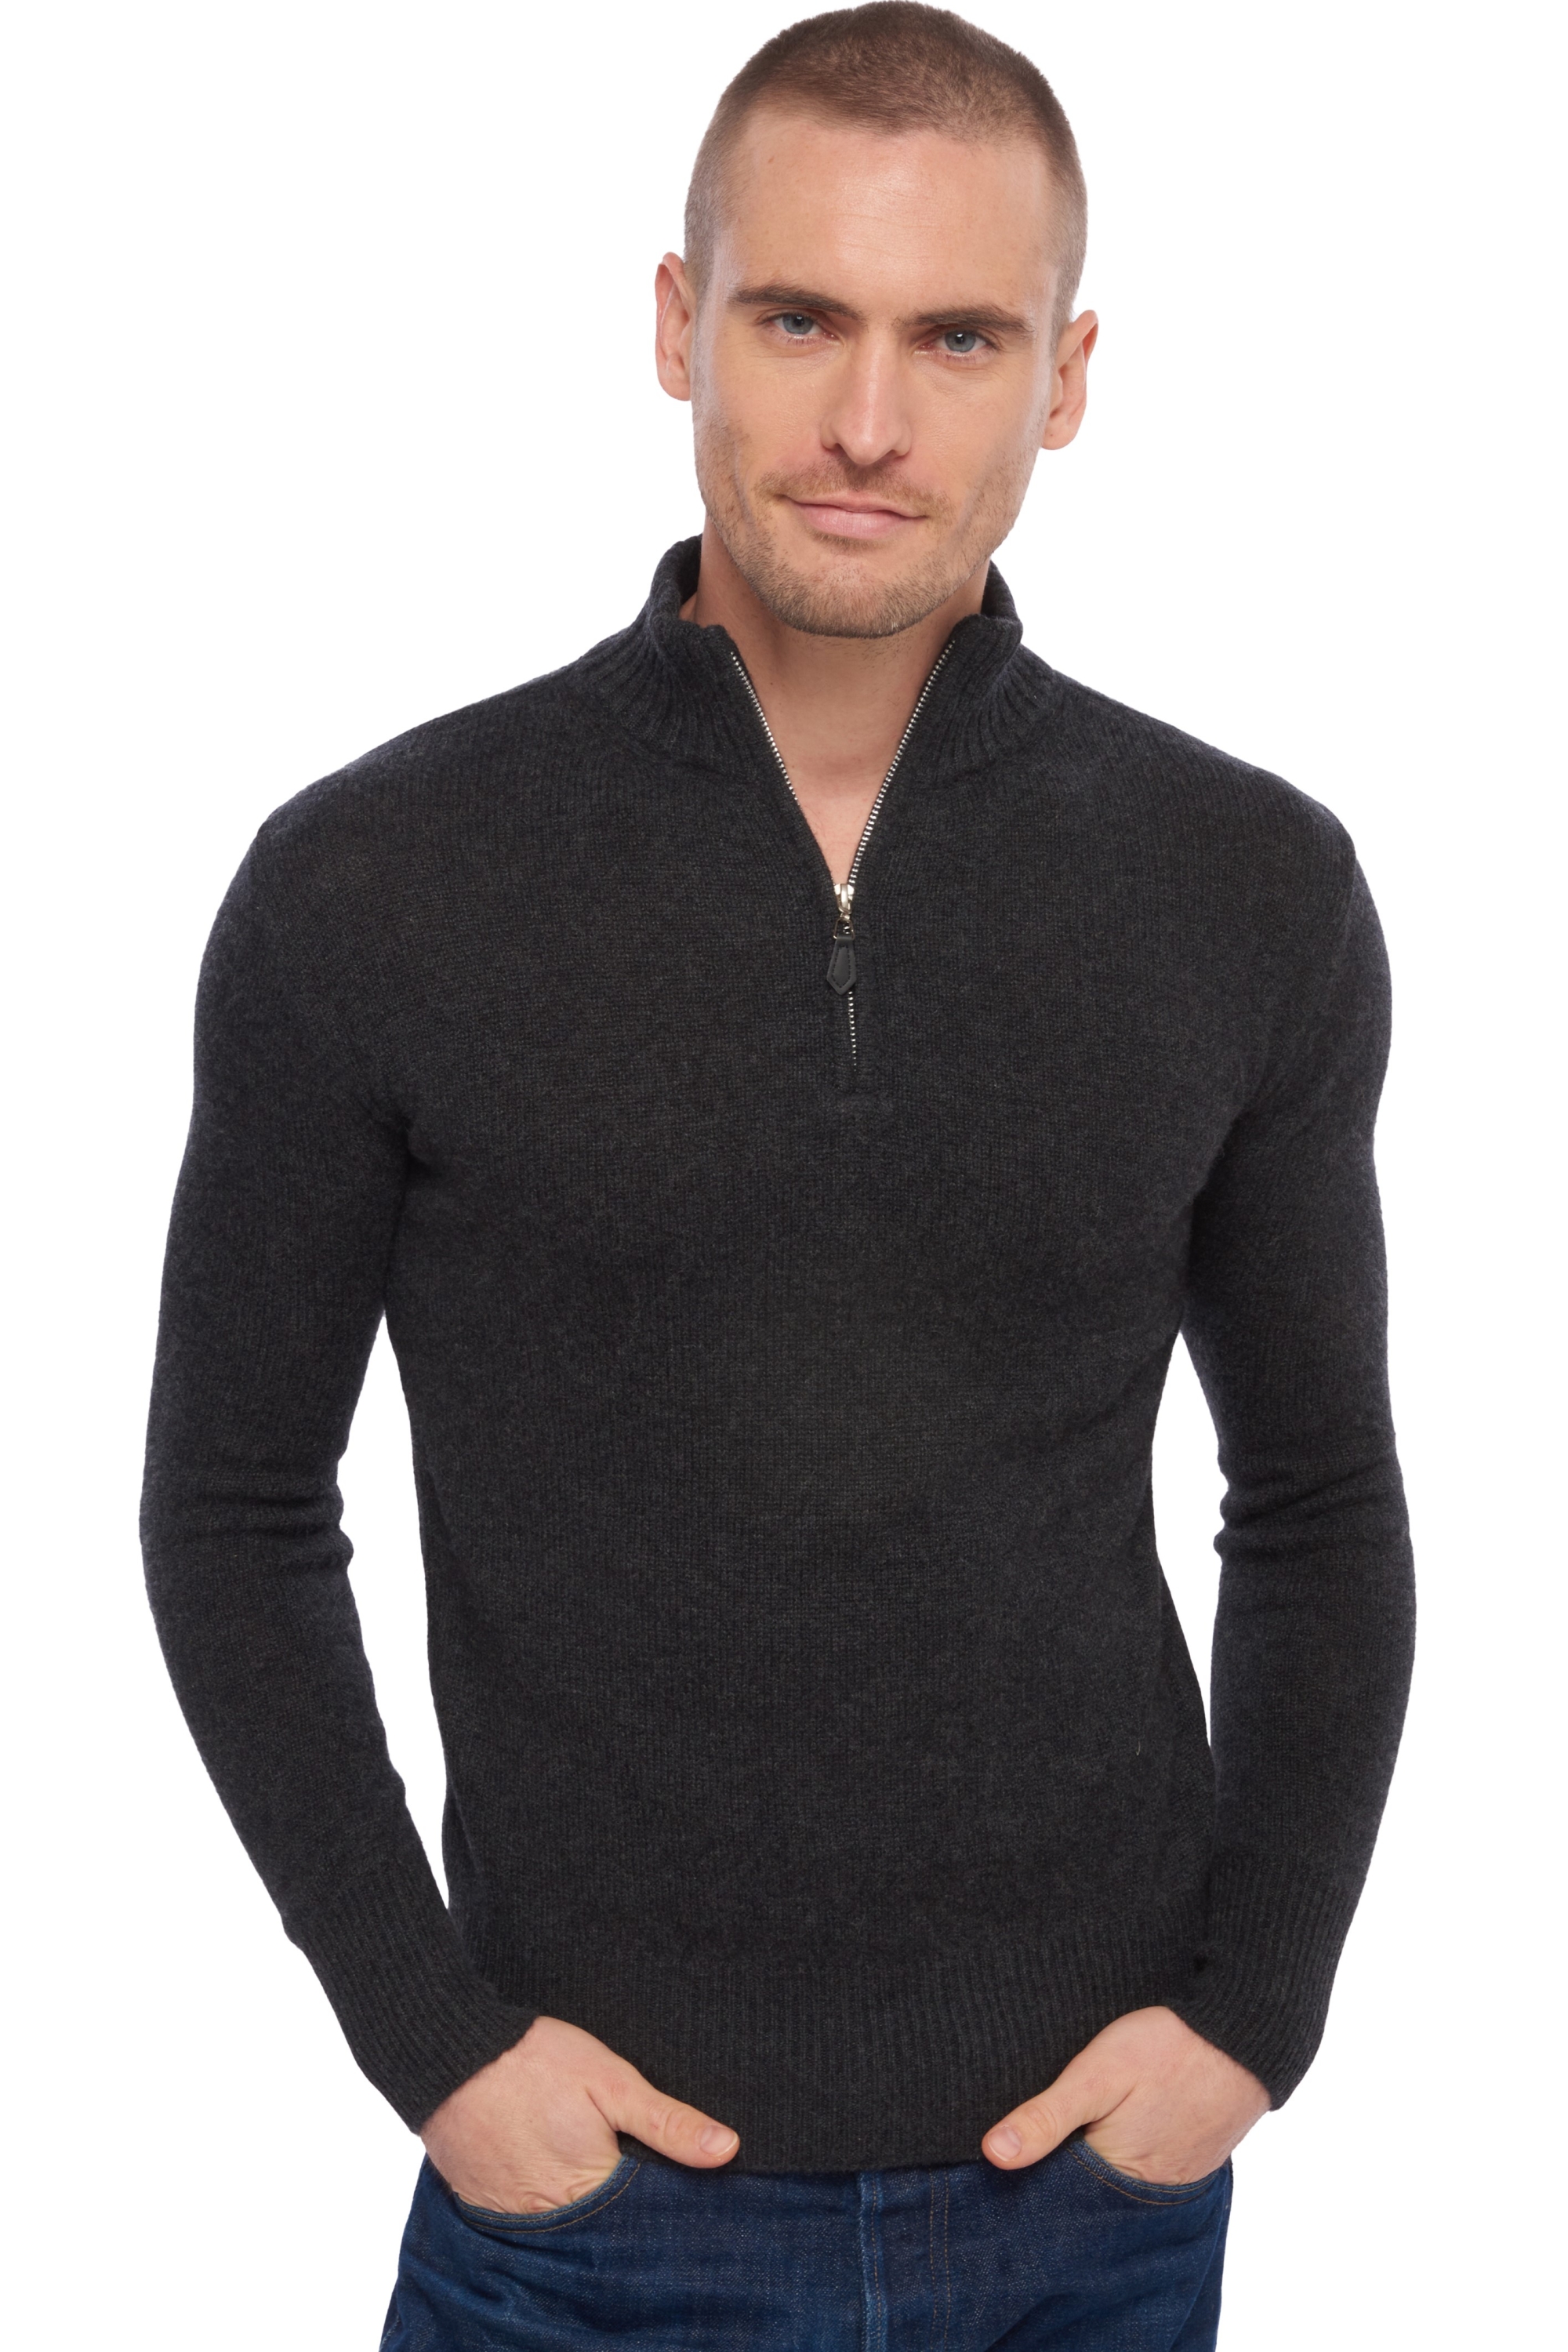 Cashmere men polo style sweaters donovan charcoal marl 3xl